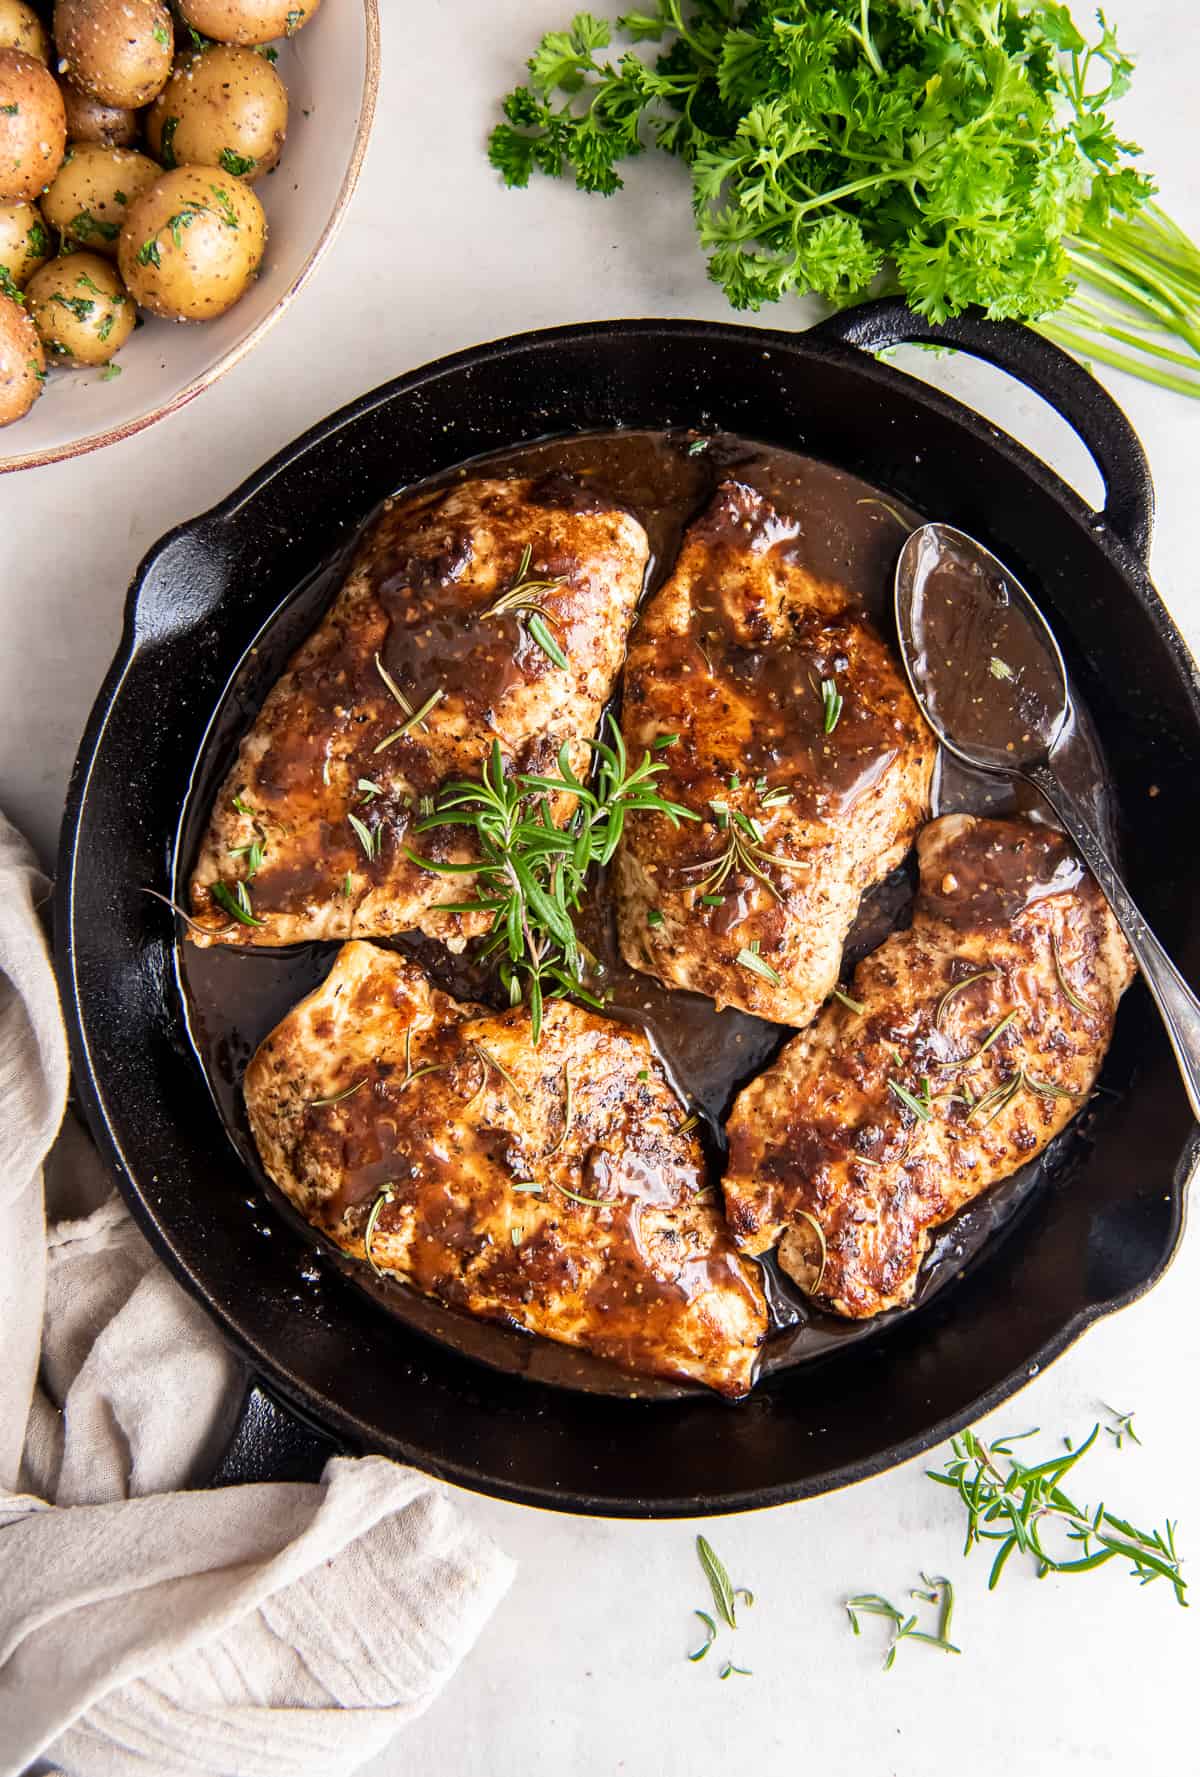 Chicken in balsamic sauce topped with sprigs of rosemary in a cast iron skillet.